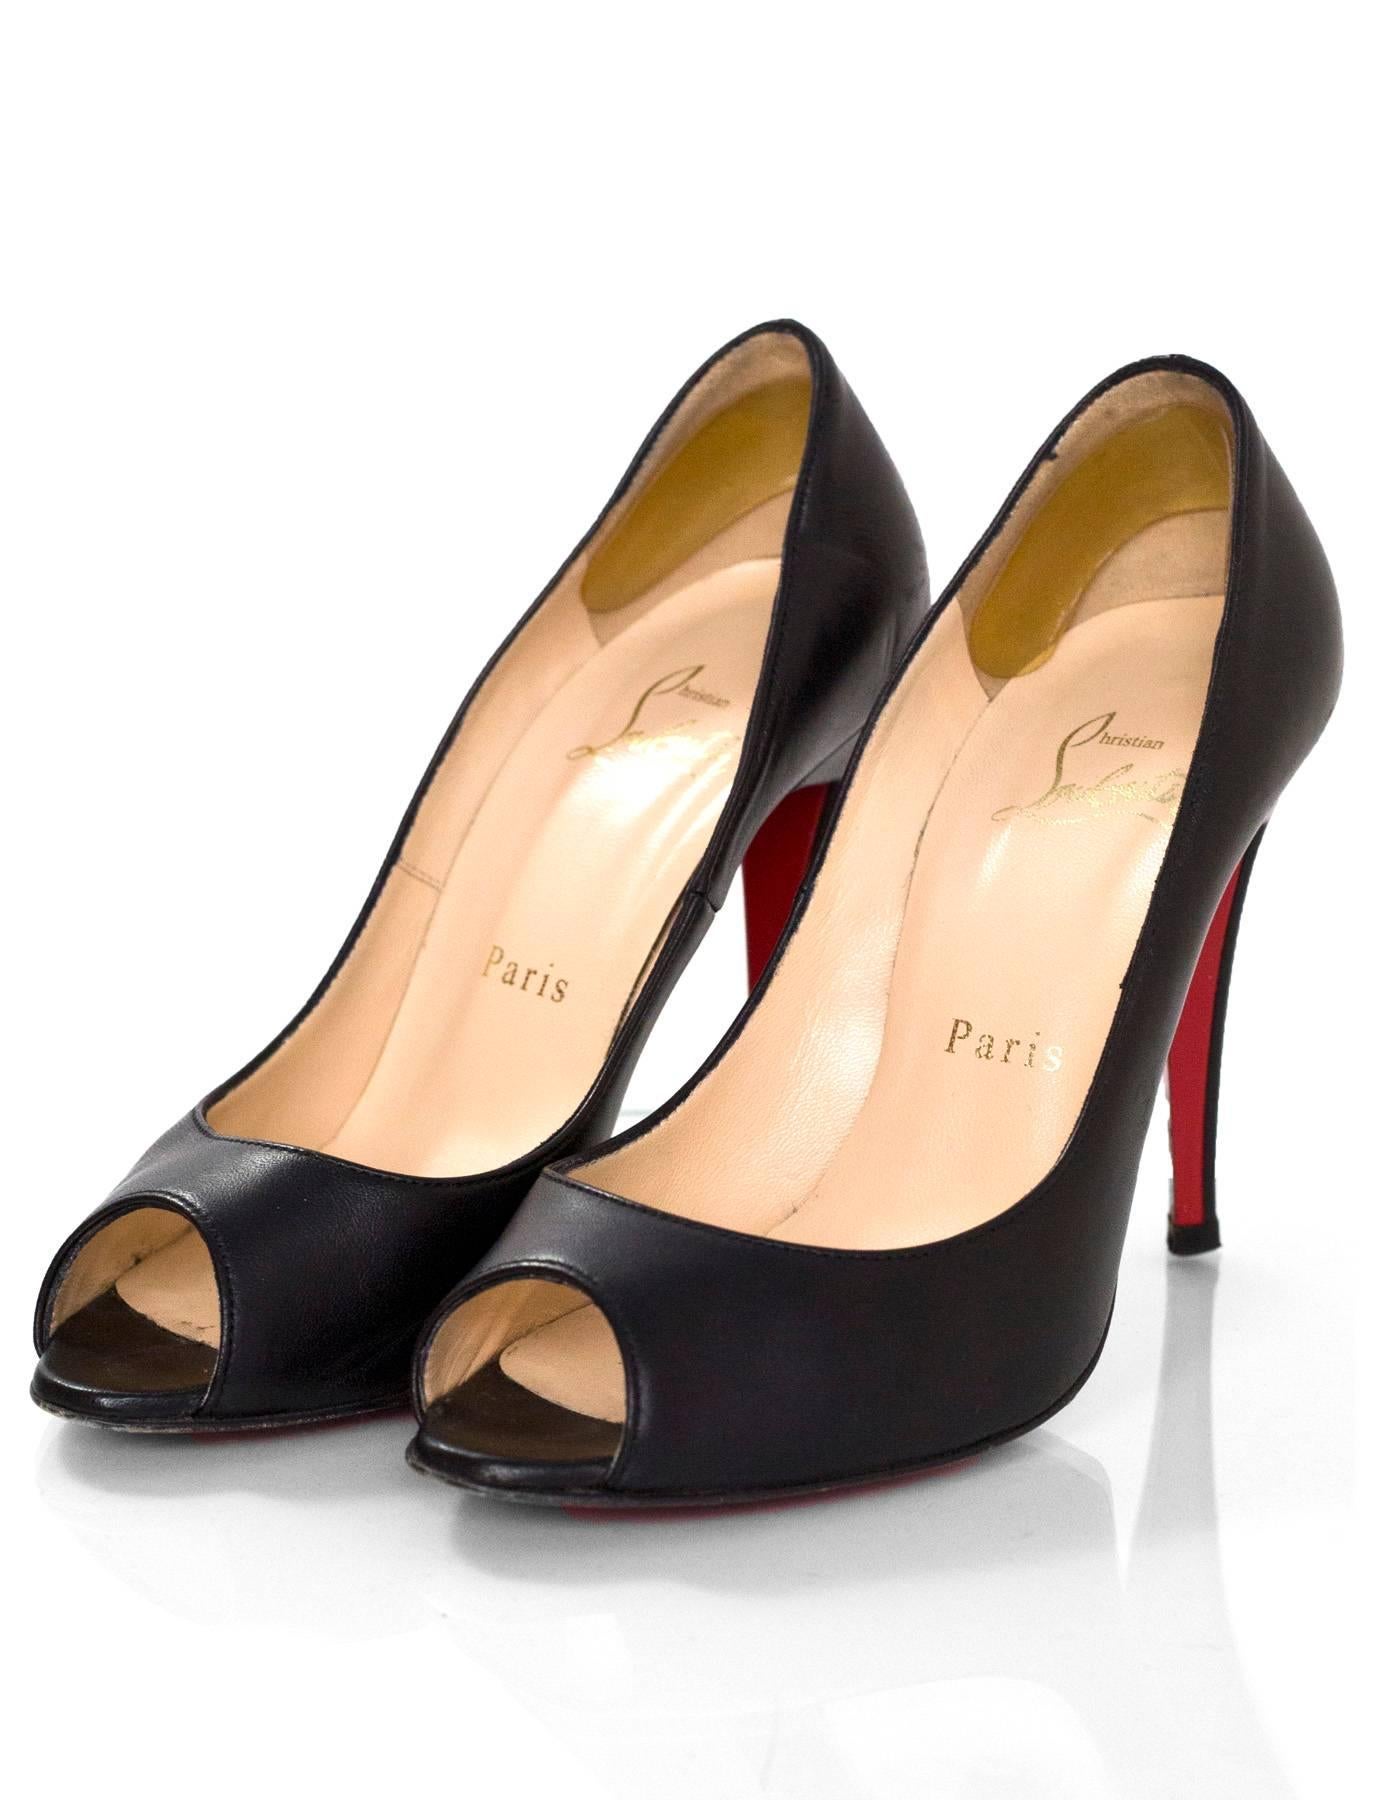 Christian Louboutin Black Altadamia 100 Peep-Toe Pumps Sz 35.5

Made In: Italy
Color: Black
Materials: Leather
Closure/Opening: Slide on
Sole Stamp: Christian Louboutin Made in Italy 35.5
Overall Condition: Excellent pre-owned condition with the